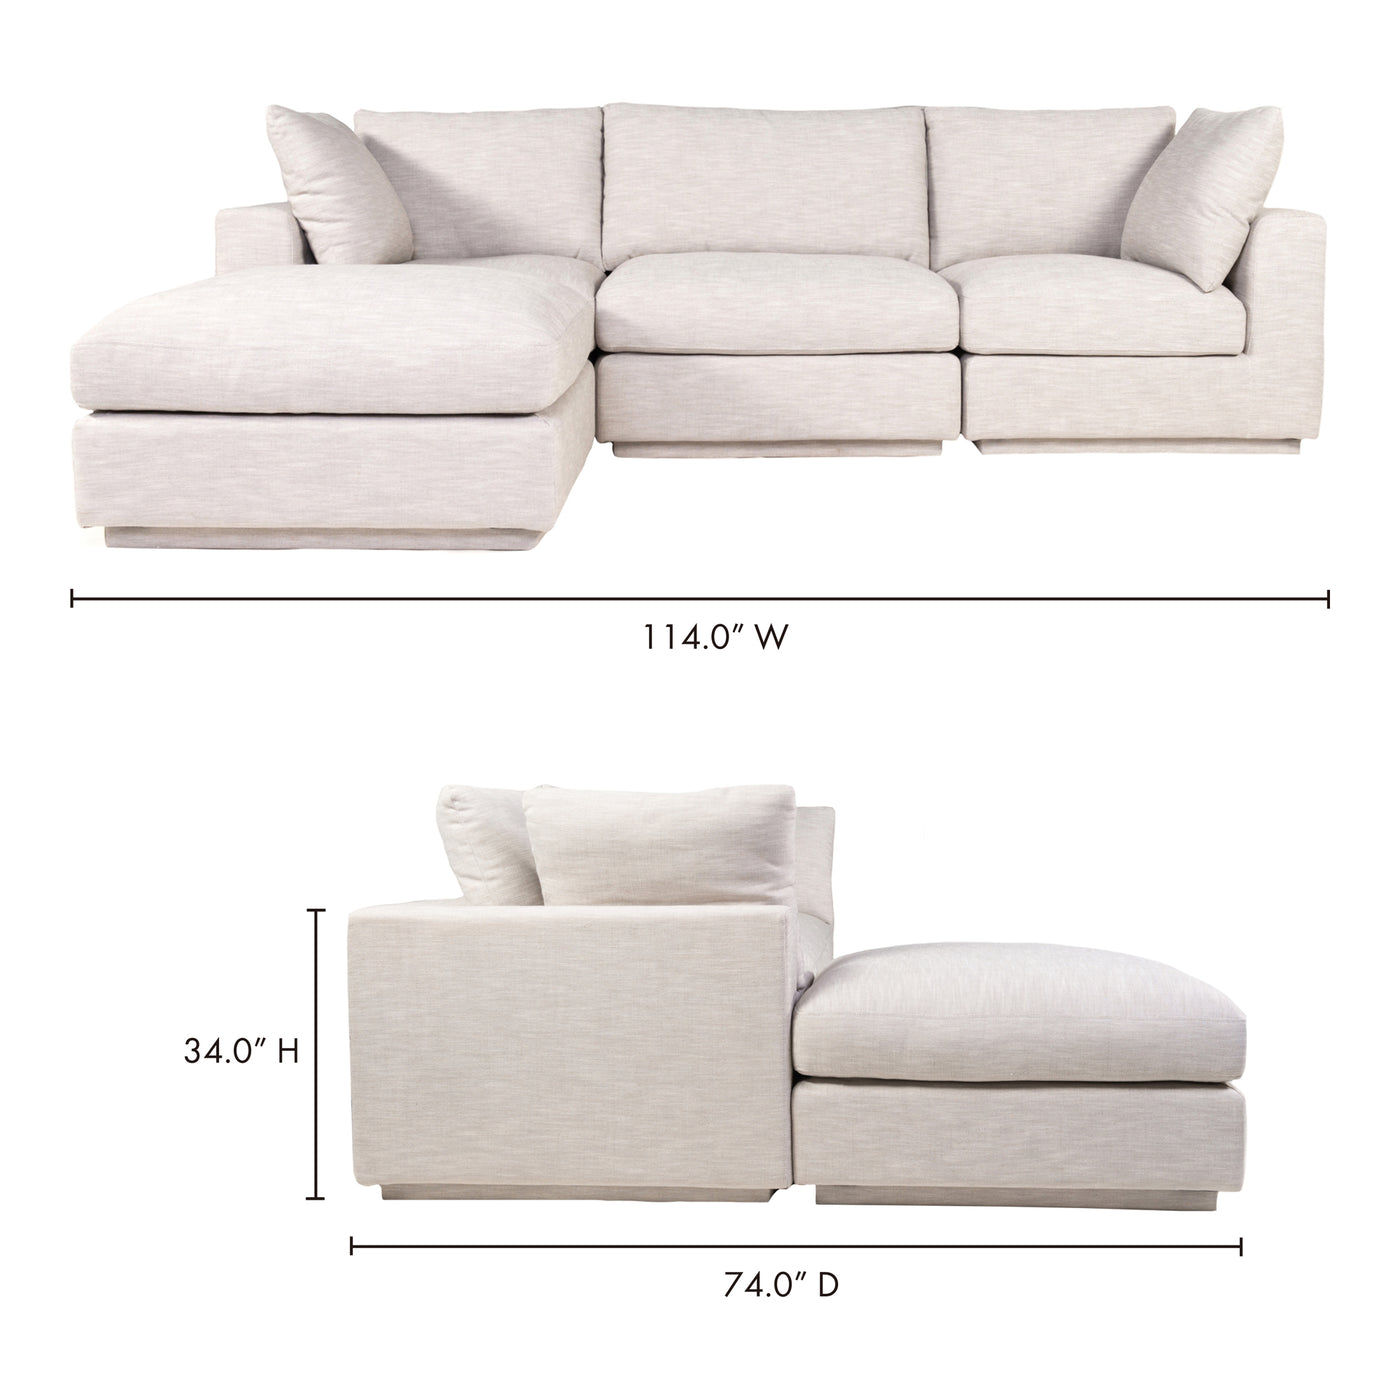 An everyday modular marvel. The Justin modular sectional is all about options, so sizing and space-fitting are up to you u...